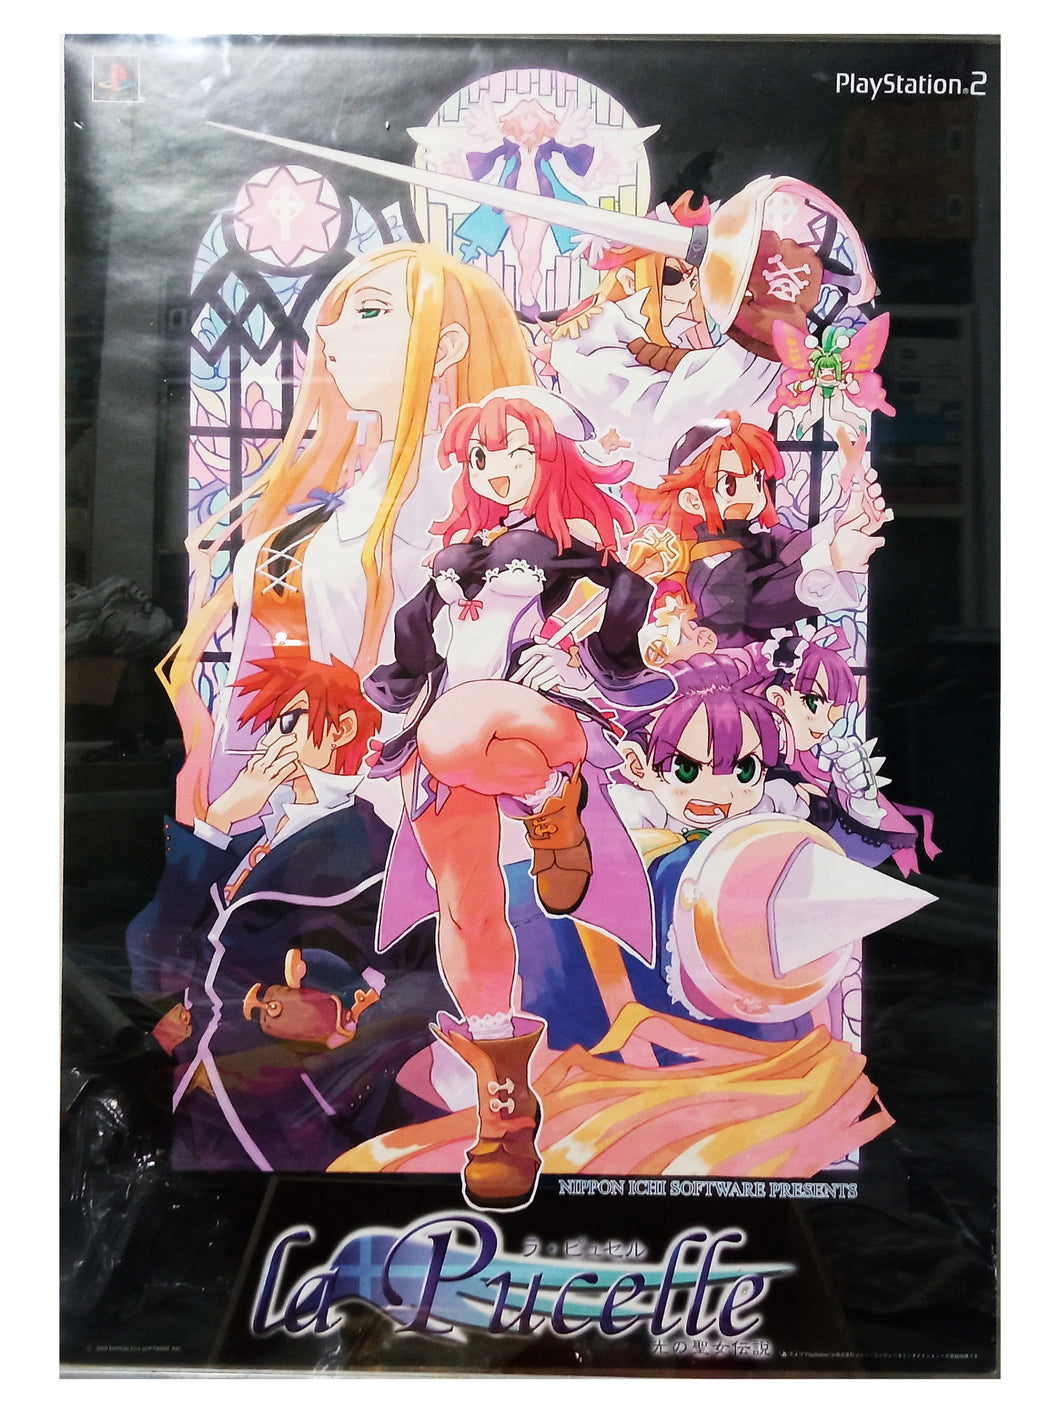 La Pucelle - B2 Poster PlayStation 2 PS2 Game Anime Retro Announcement Promotion [Not for sale]